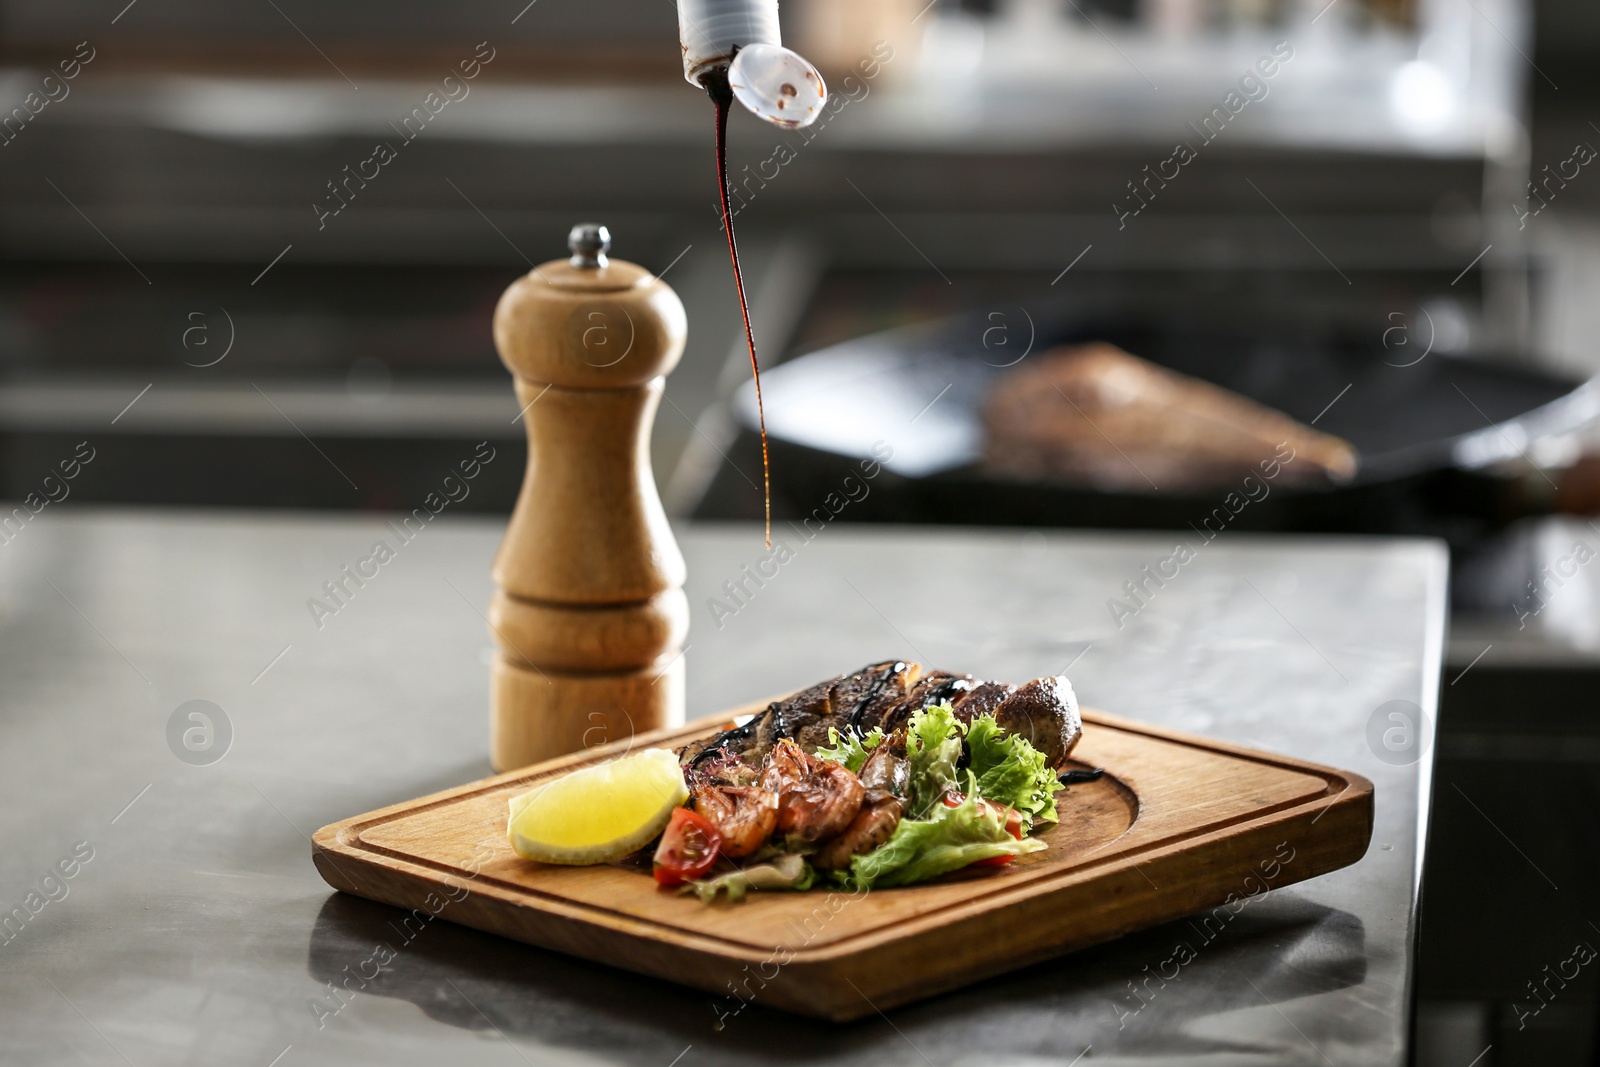 Photo of Adding sauce to tasty meal on table in restaurant kitchen. Cooking food